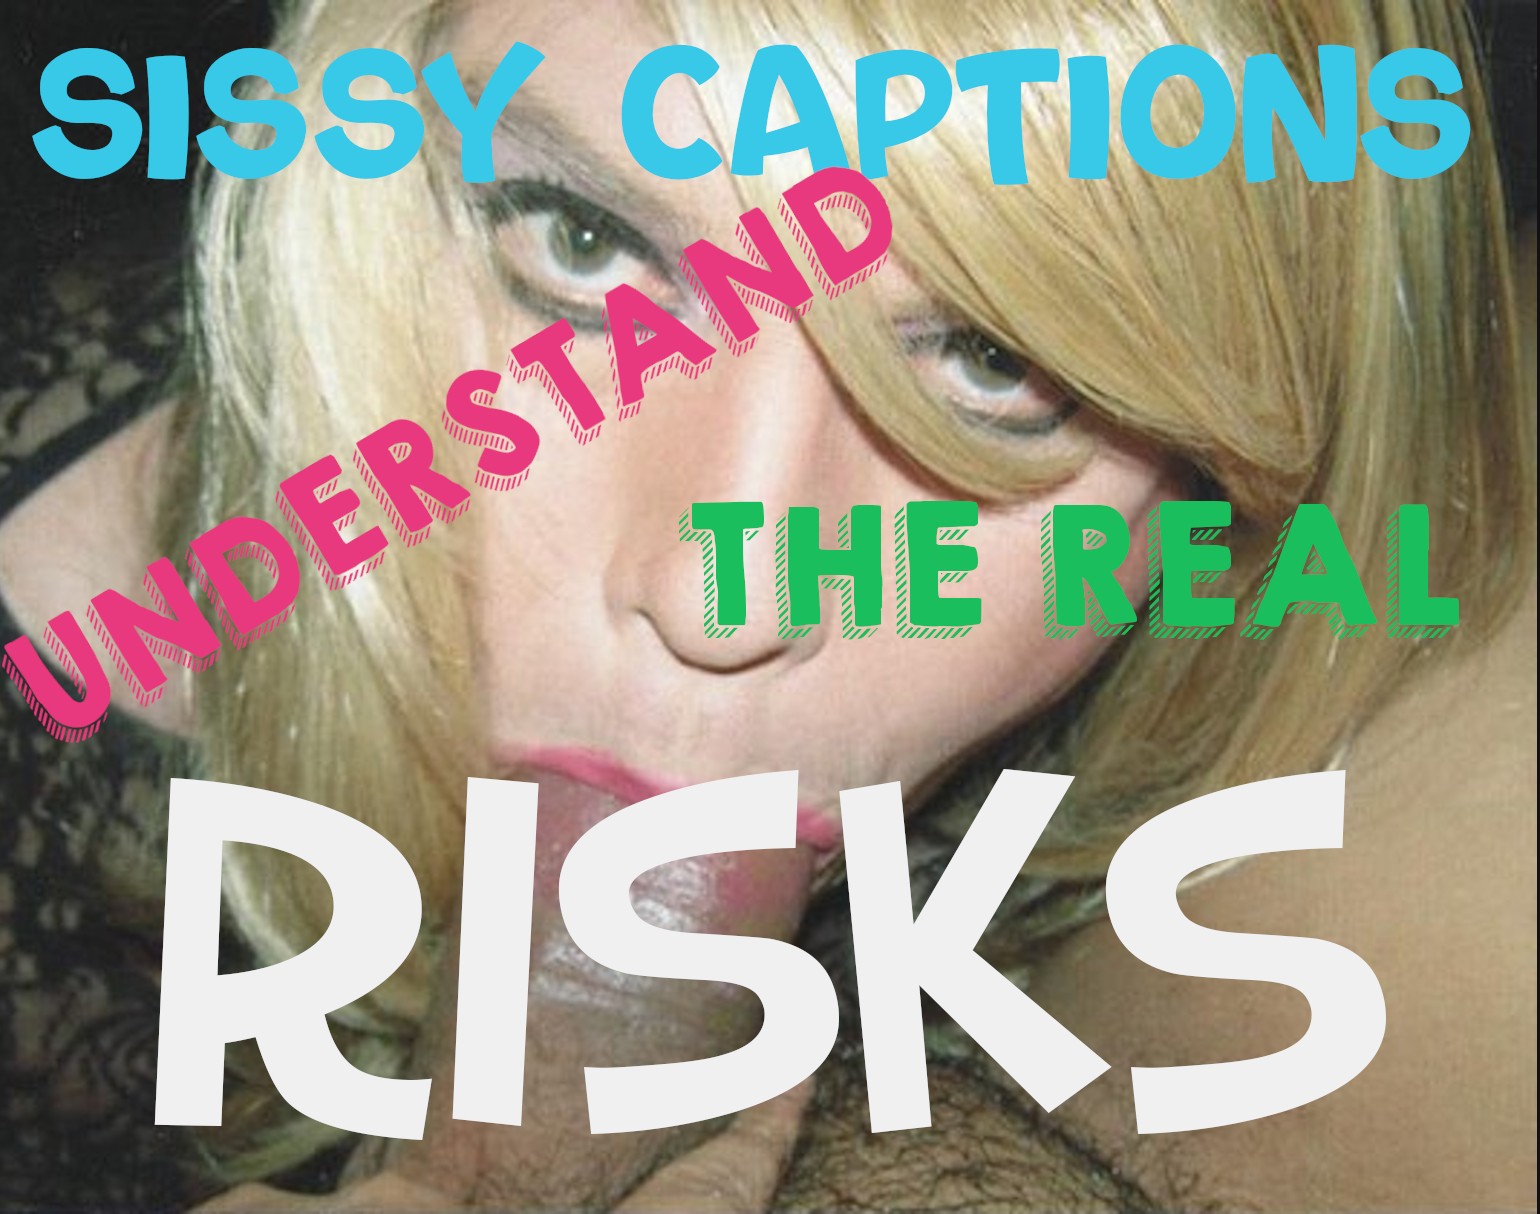 Hair Porn Captions - The real risks of sissy captions - Freakden